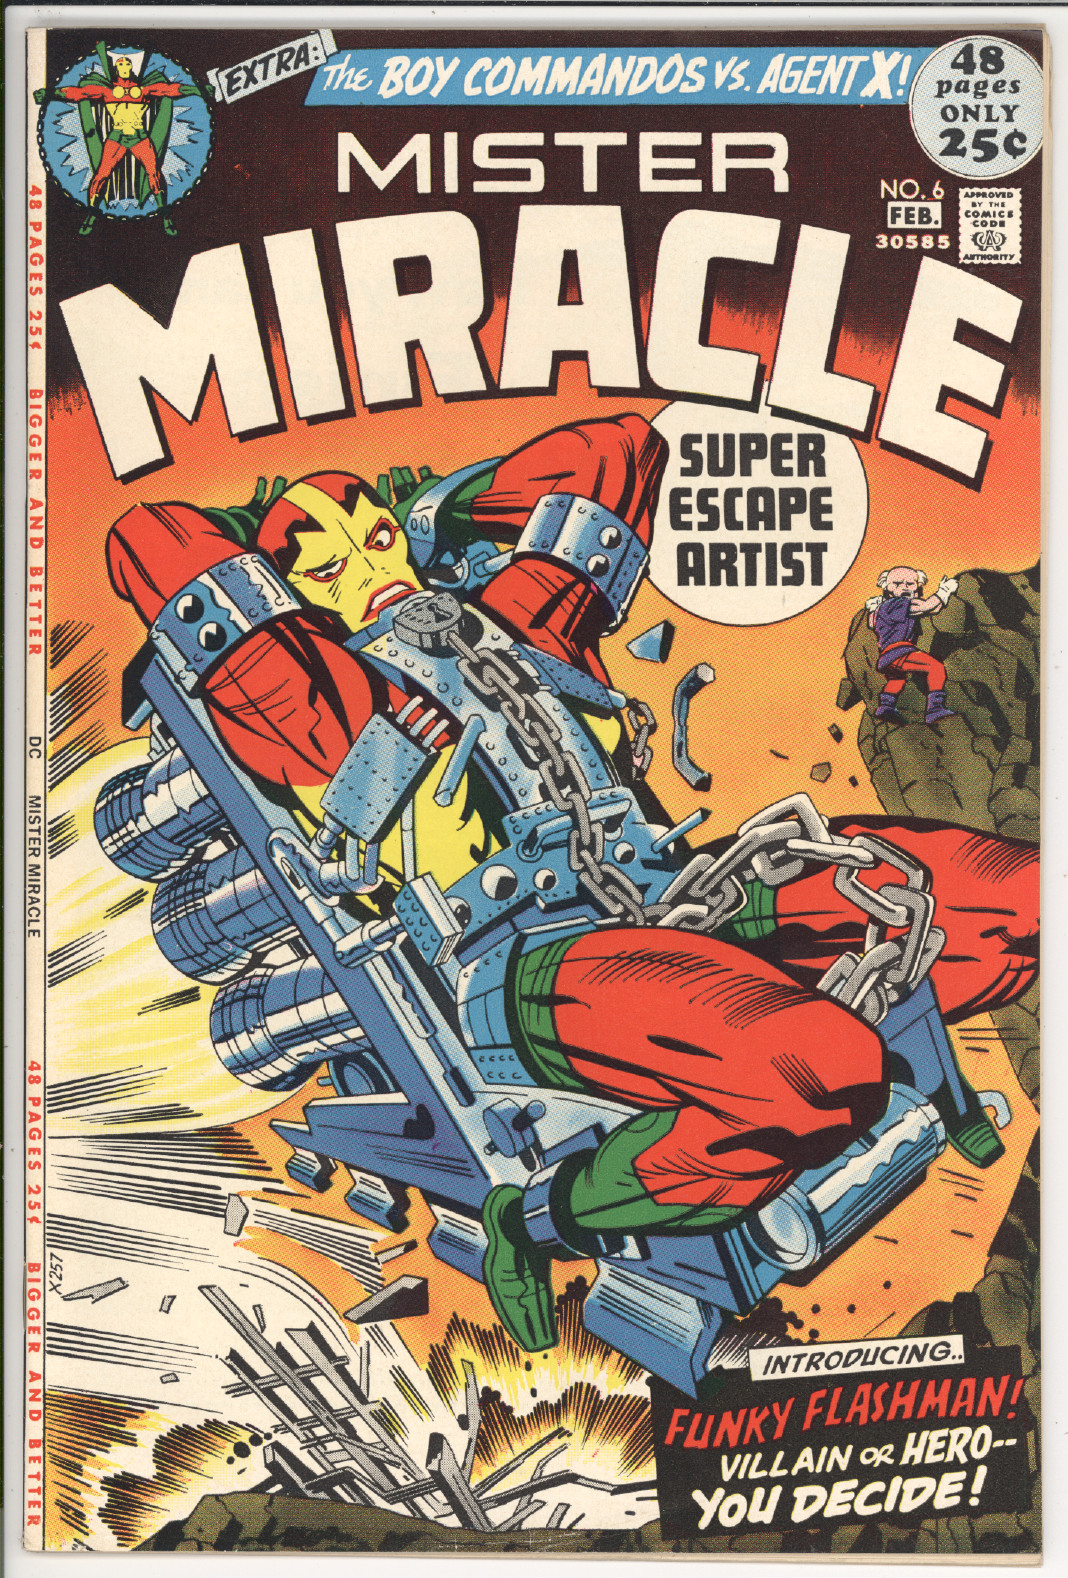 Mister Miracle #6 front